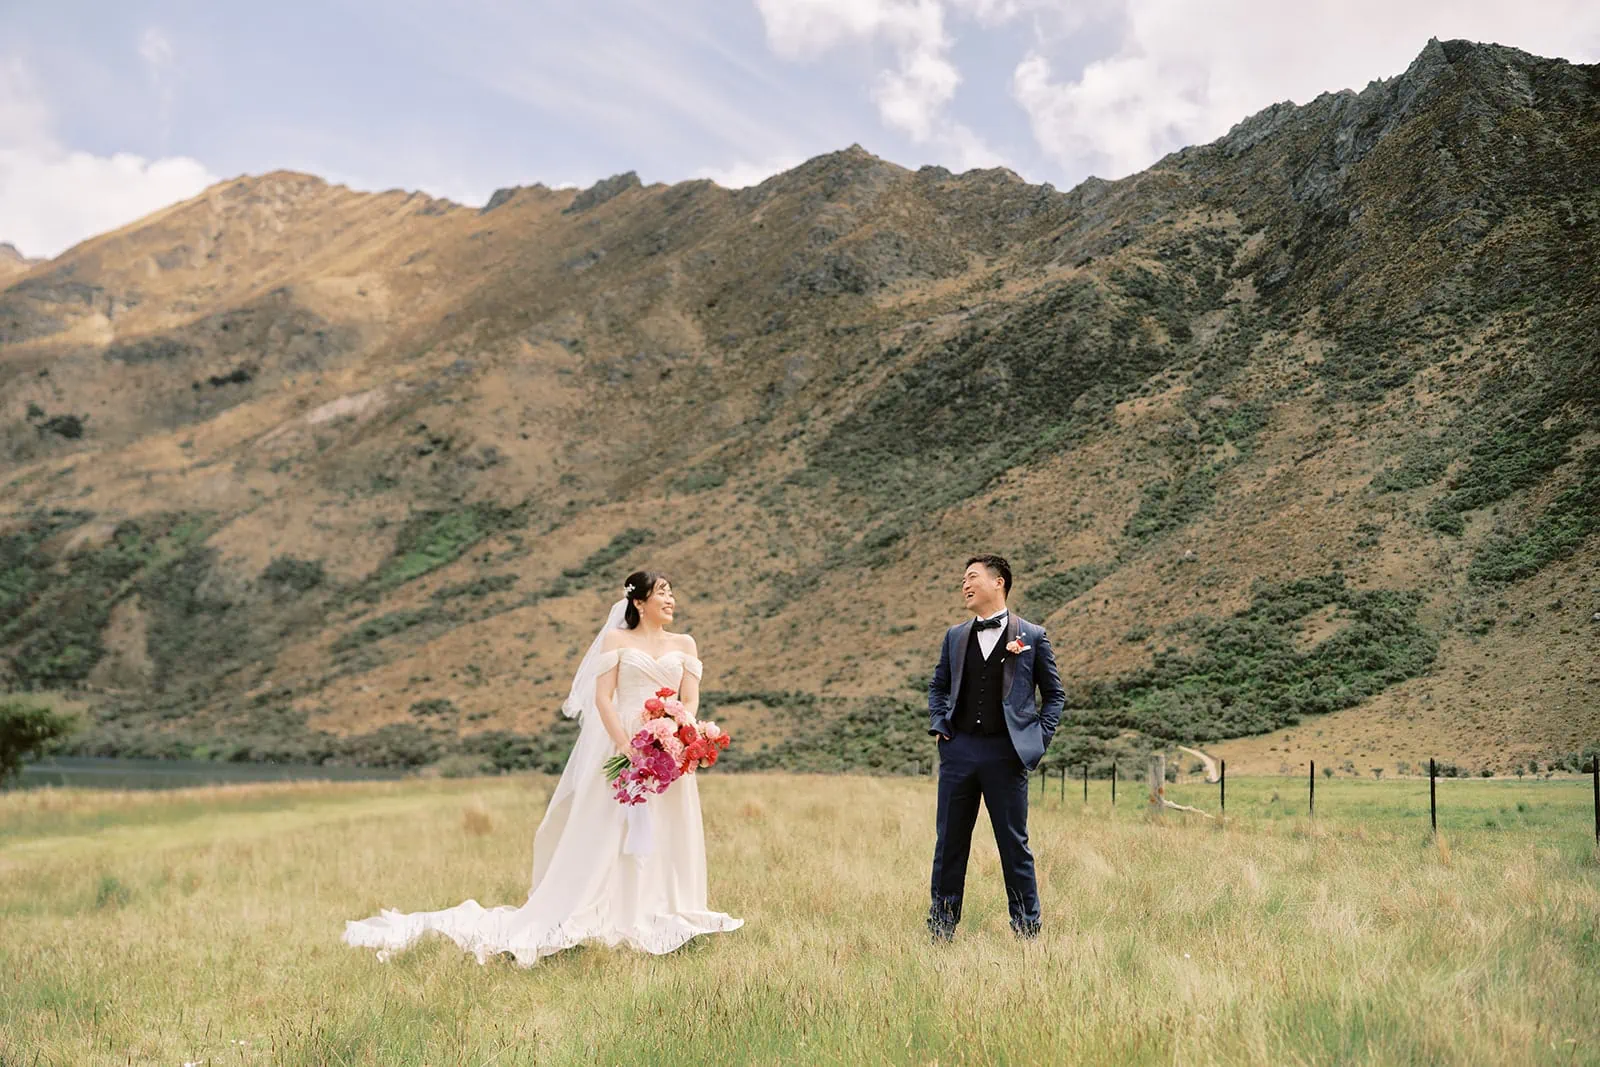 Queenstown Elopement Heli Wedding Photographer クイーンズタウン結婚式 | A bride and groom having a pre-wedding photoshoot in a field with mountains in the background.